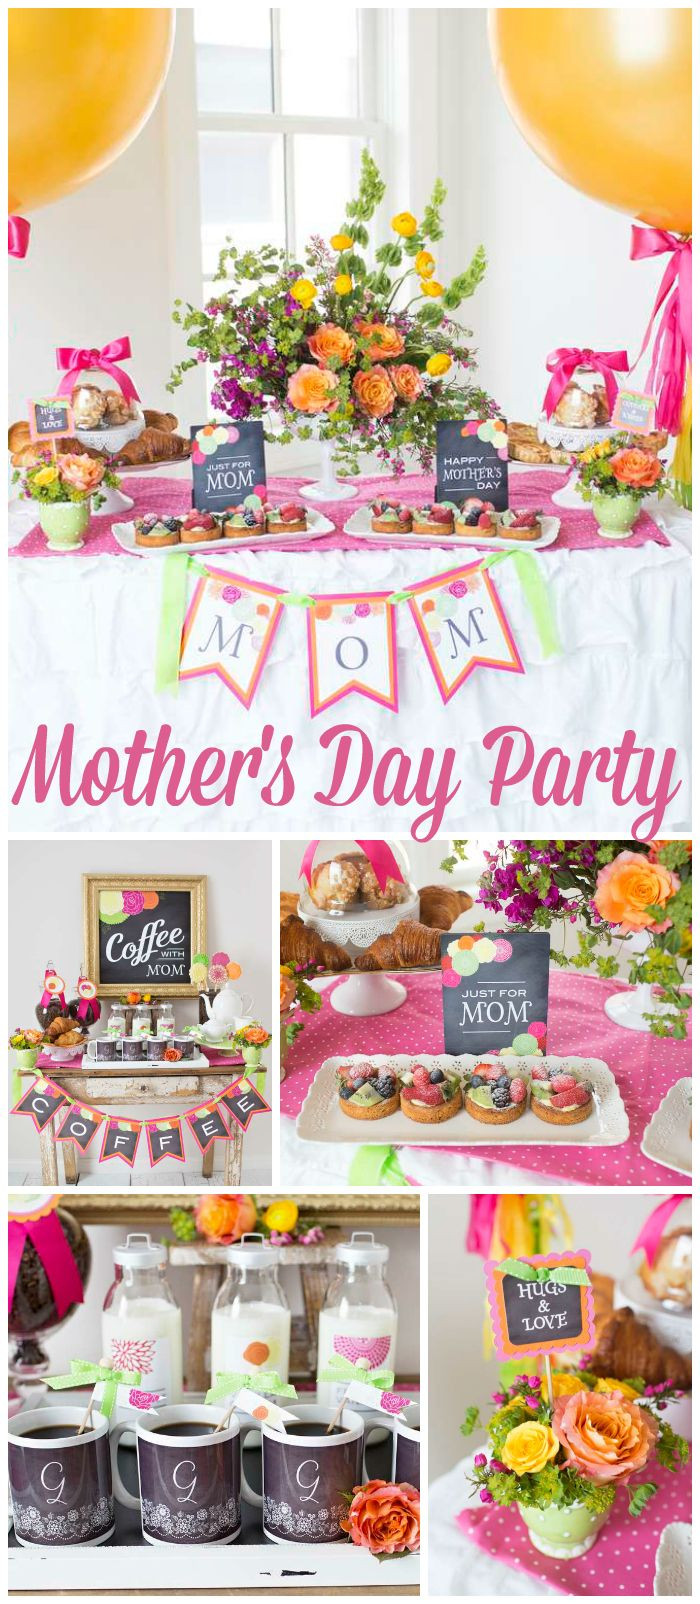 Mother's Day Party Ideas
 "Coffee With Mom" Mother s Day "Bright and Fun Mother s